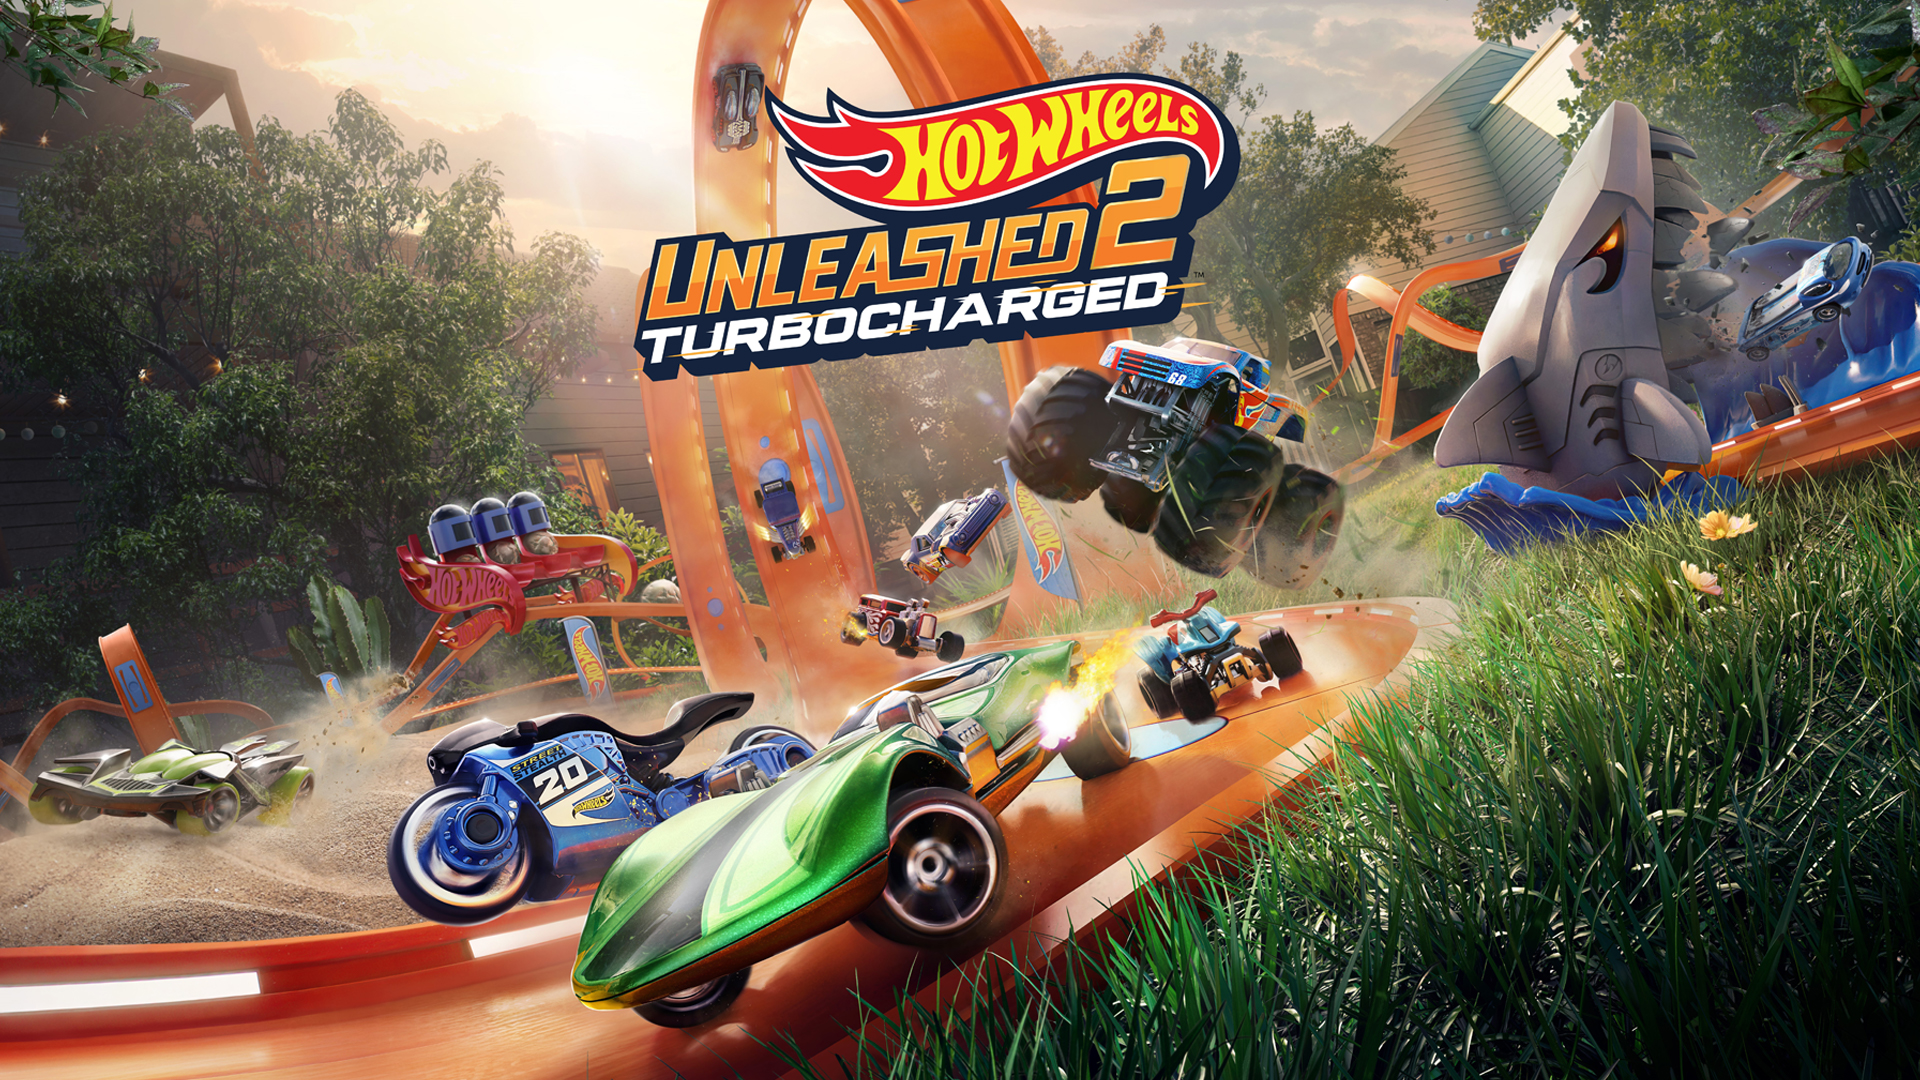 Hot Wheels Unleashed 2: Turbocharged shows off game modes and single player